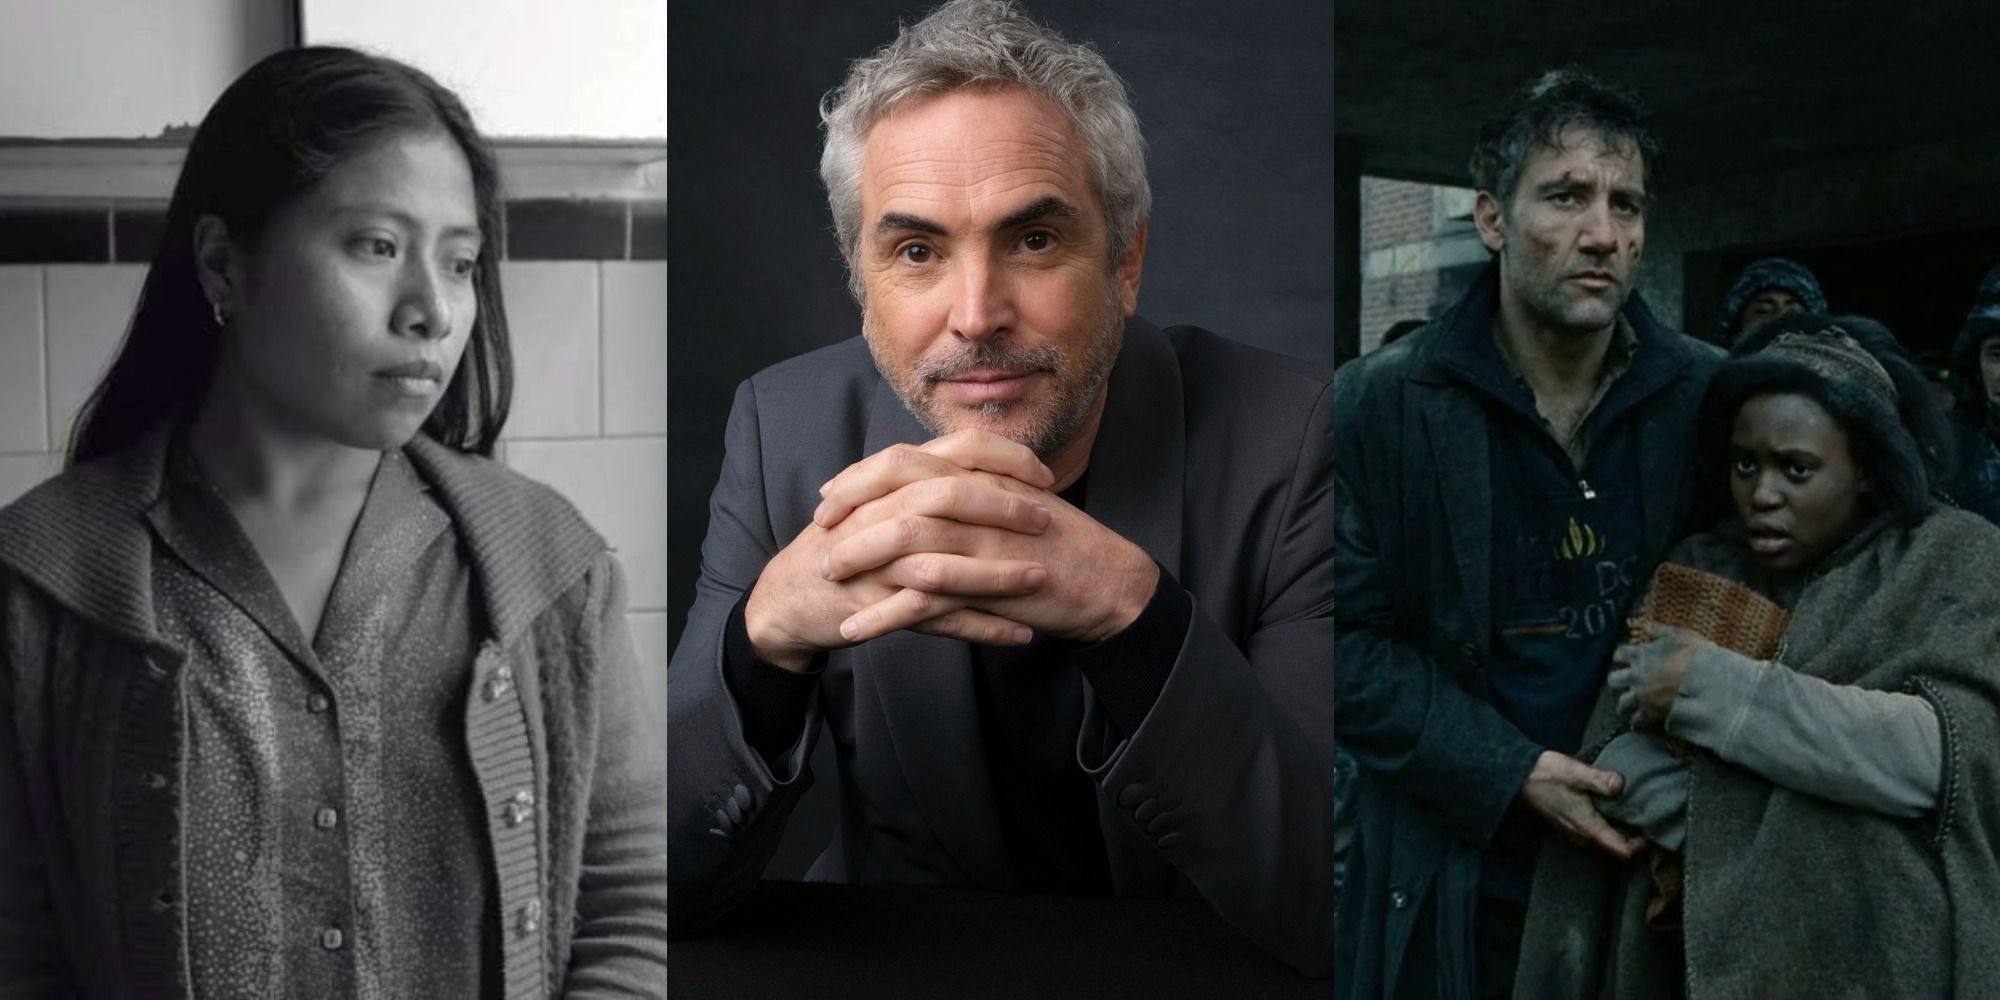 Split image showing scenes from Roma and Children of Men, and director Alfonso Cuarón